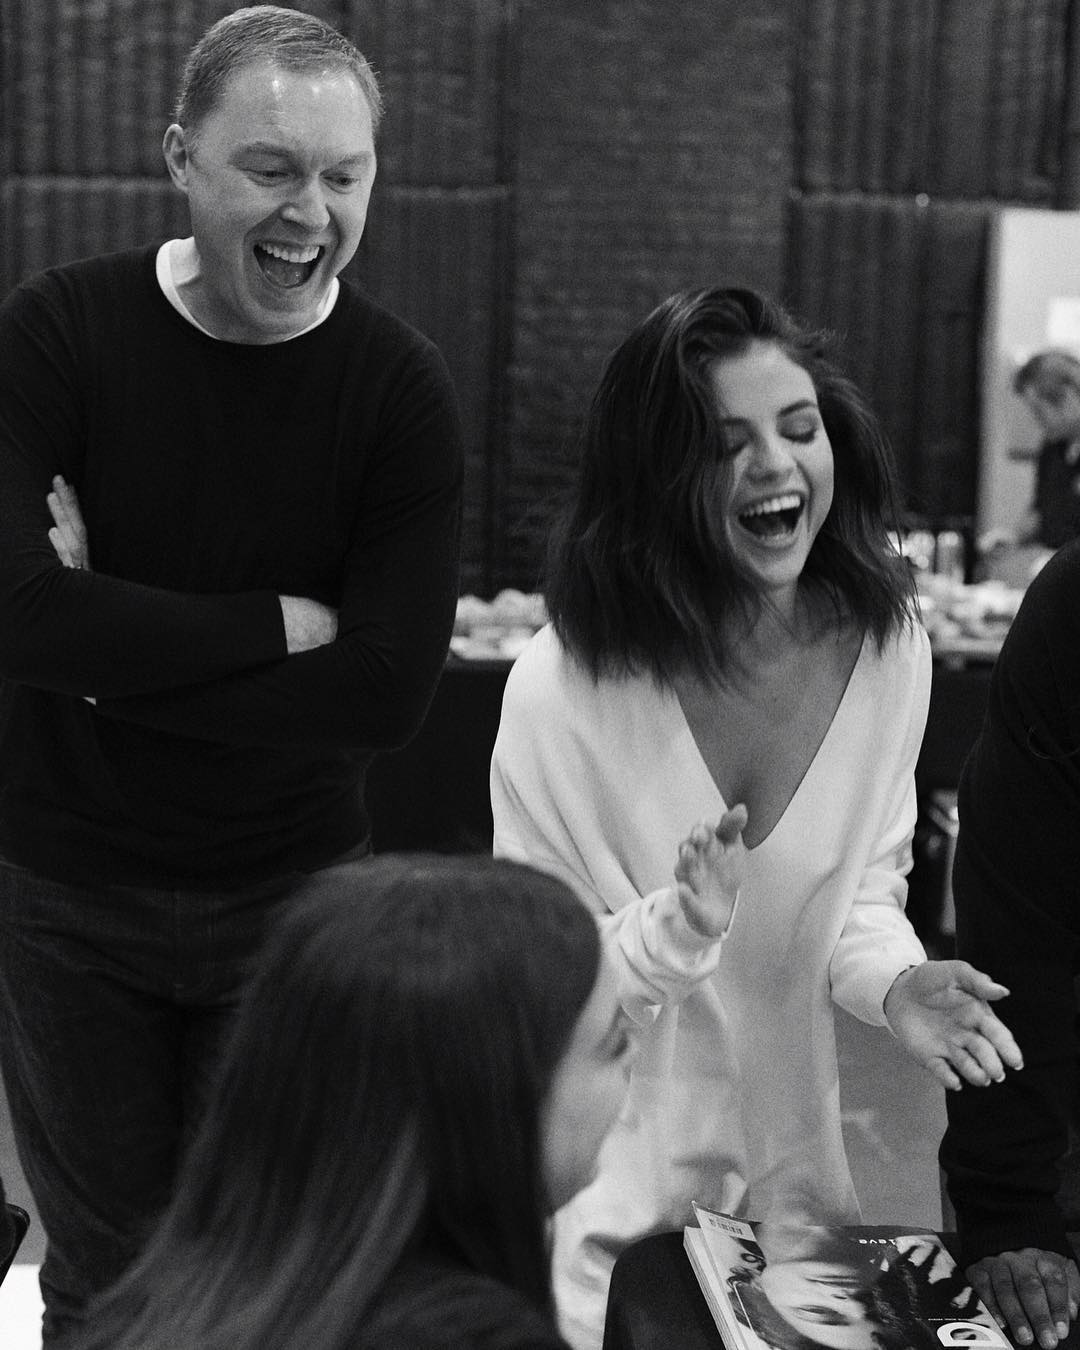 Creative director of Coach, Stuart Vevers, helps Selena Gomez get red carpet-ready.